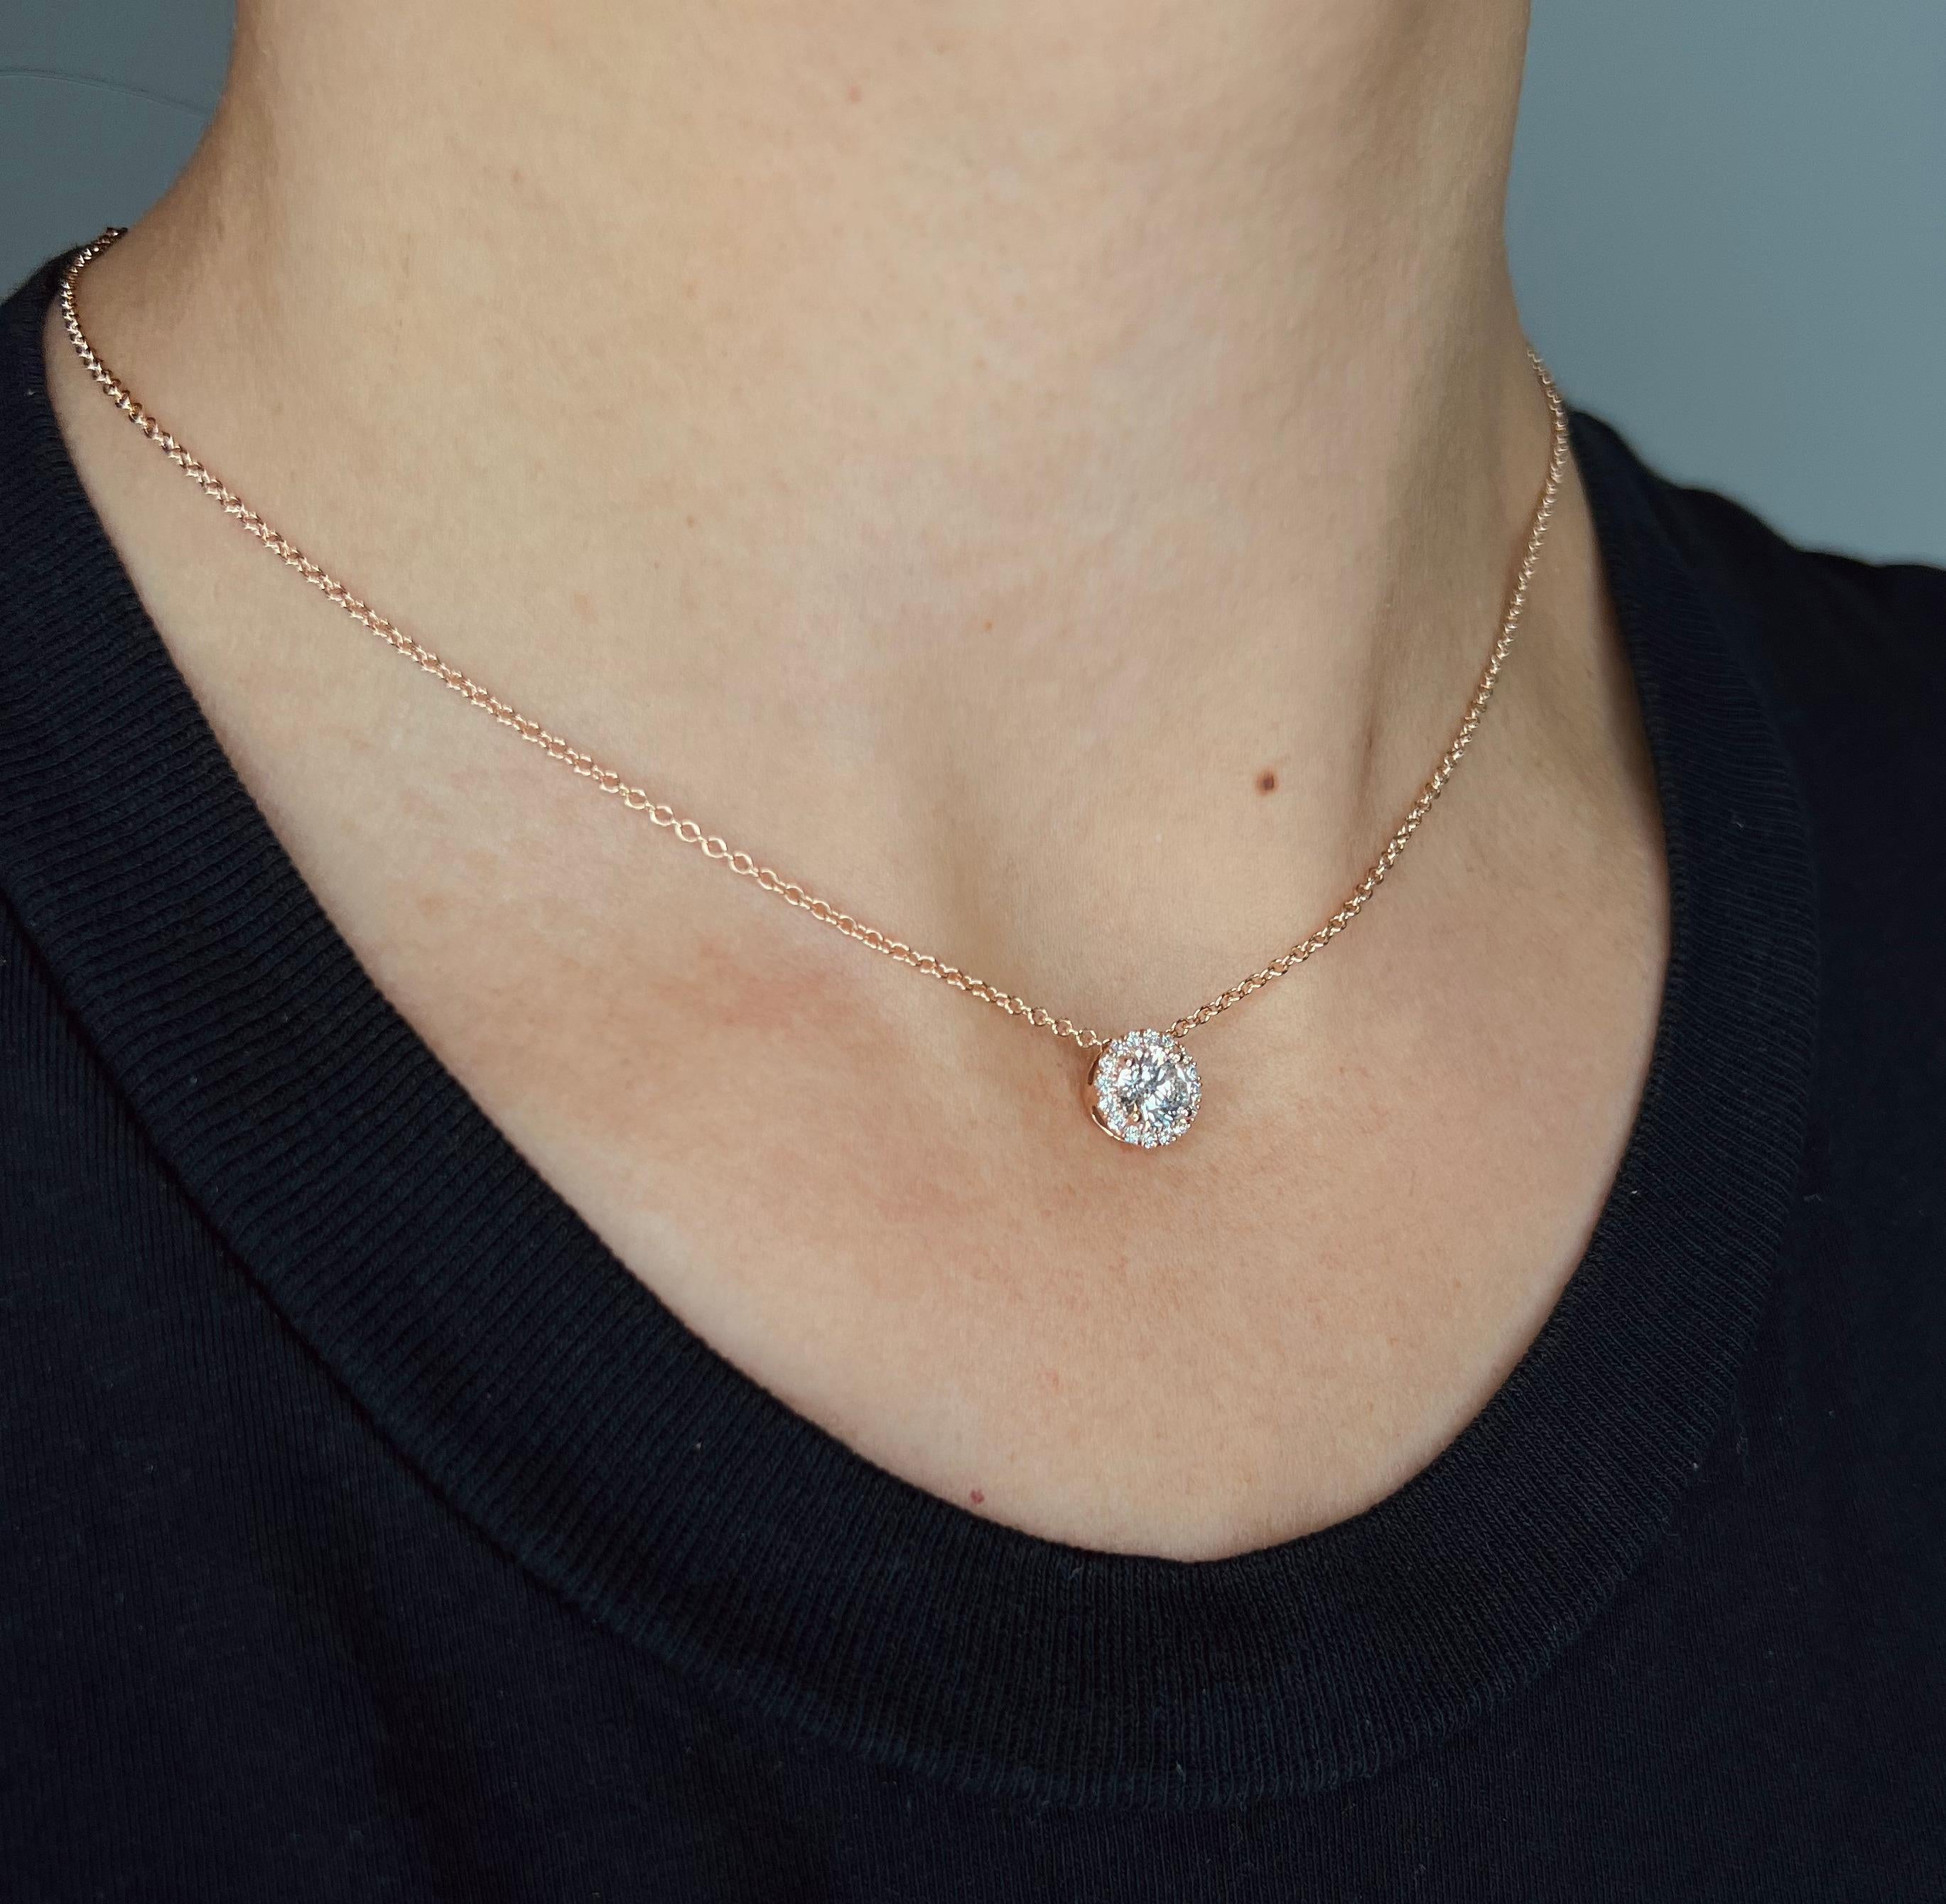 20 Inch 14k Yellow Gold 0.90 Carat Round Cut Diamond Solitaire Pendant Necklace In New Condition For Sale In Los Angeles, CA